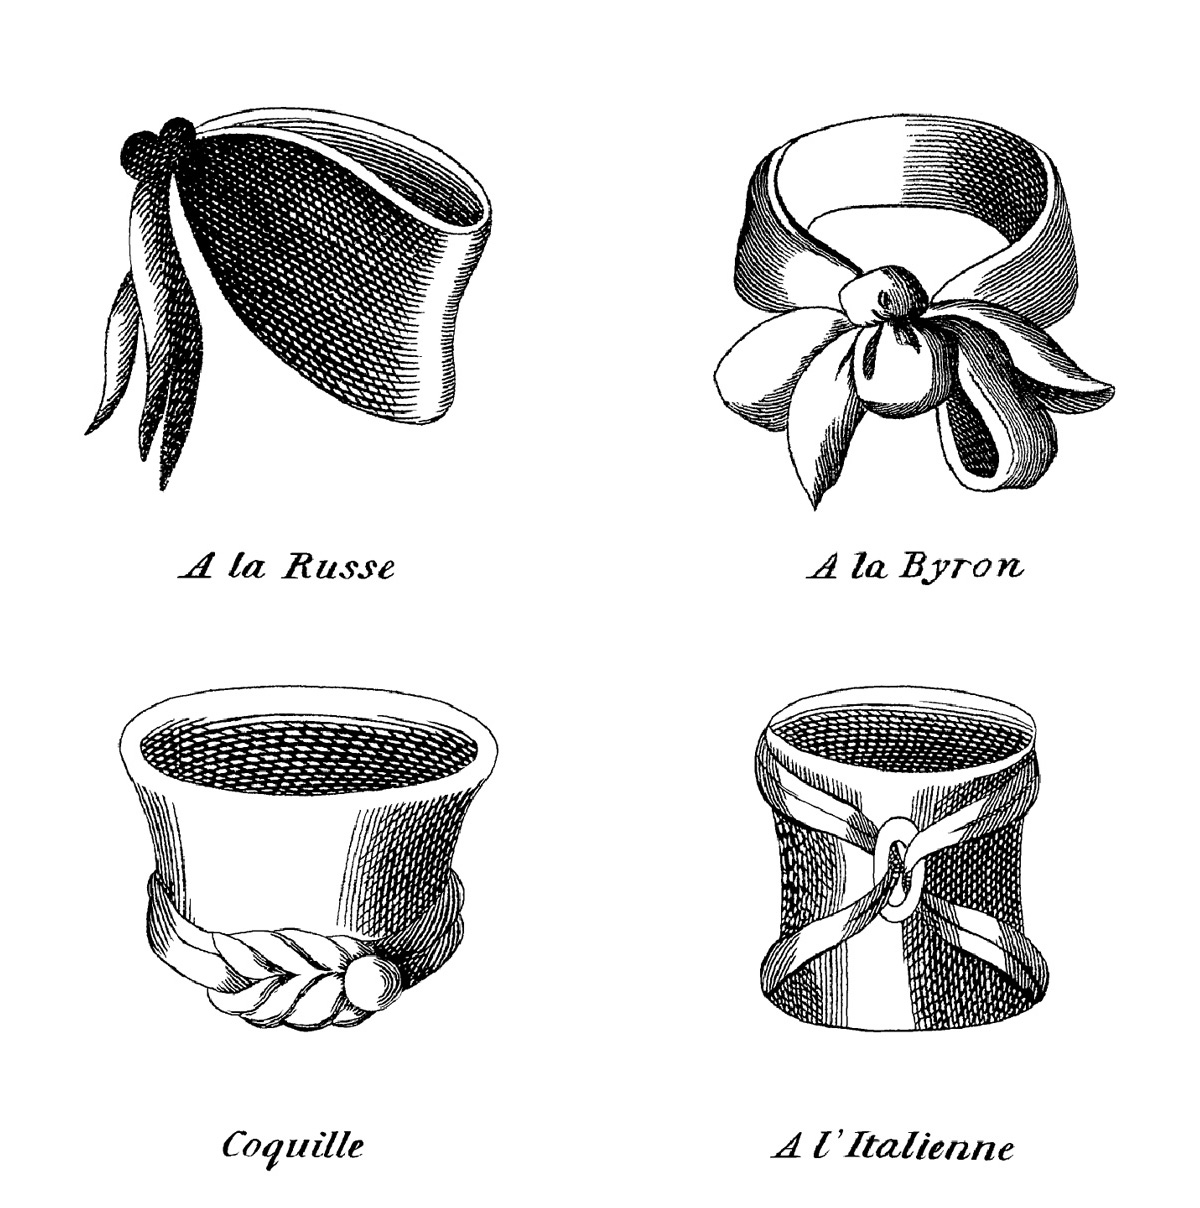 An illustration from H. Le Blanc’s The Art of Tying the Cravat depicting four different types of knots.